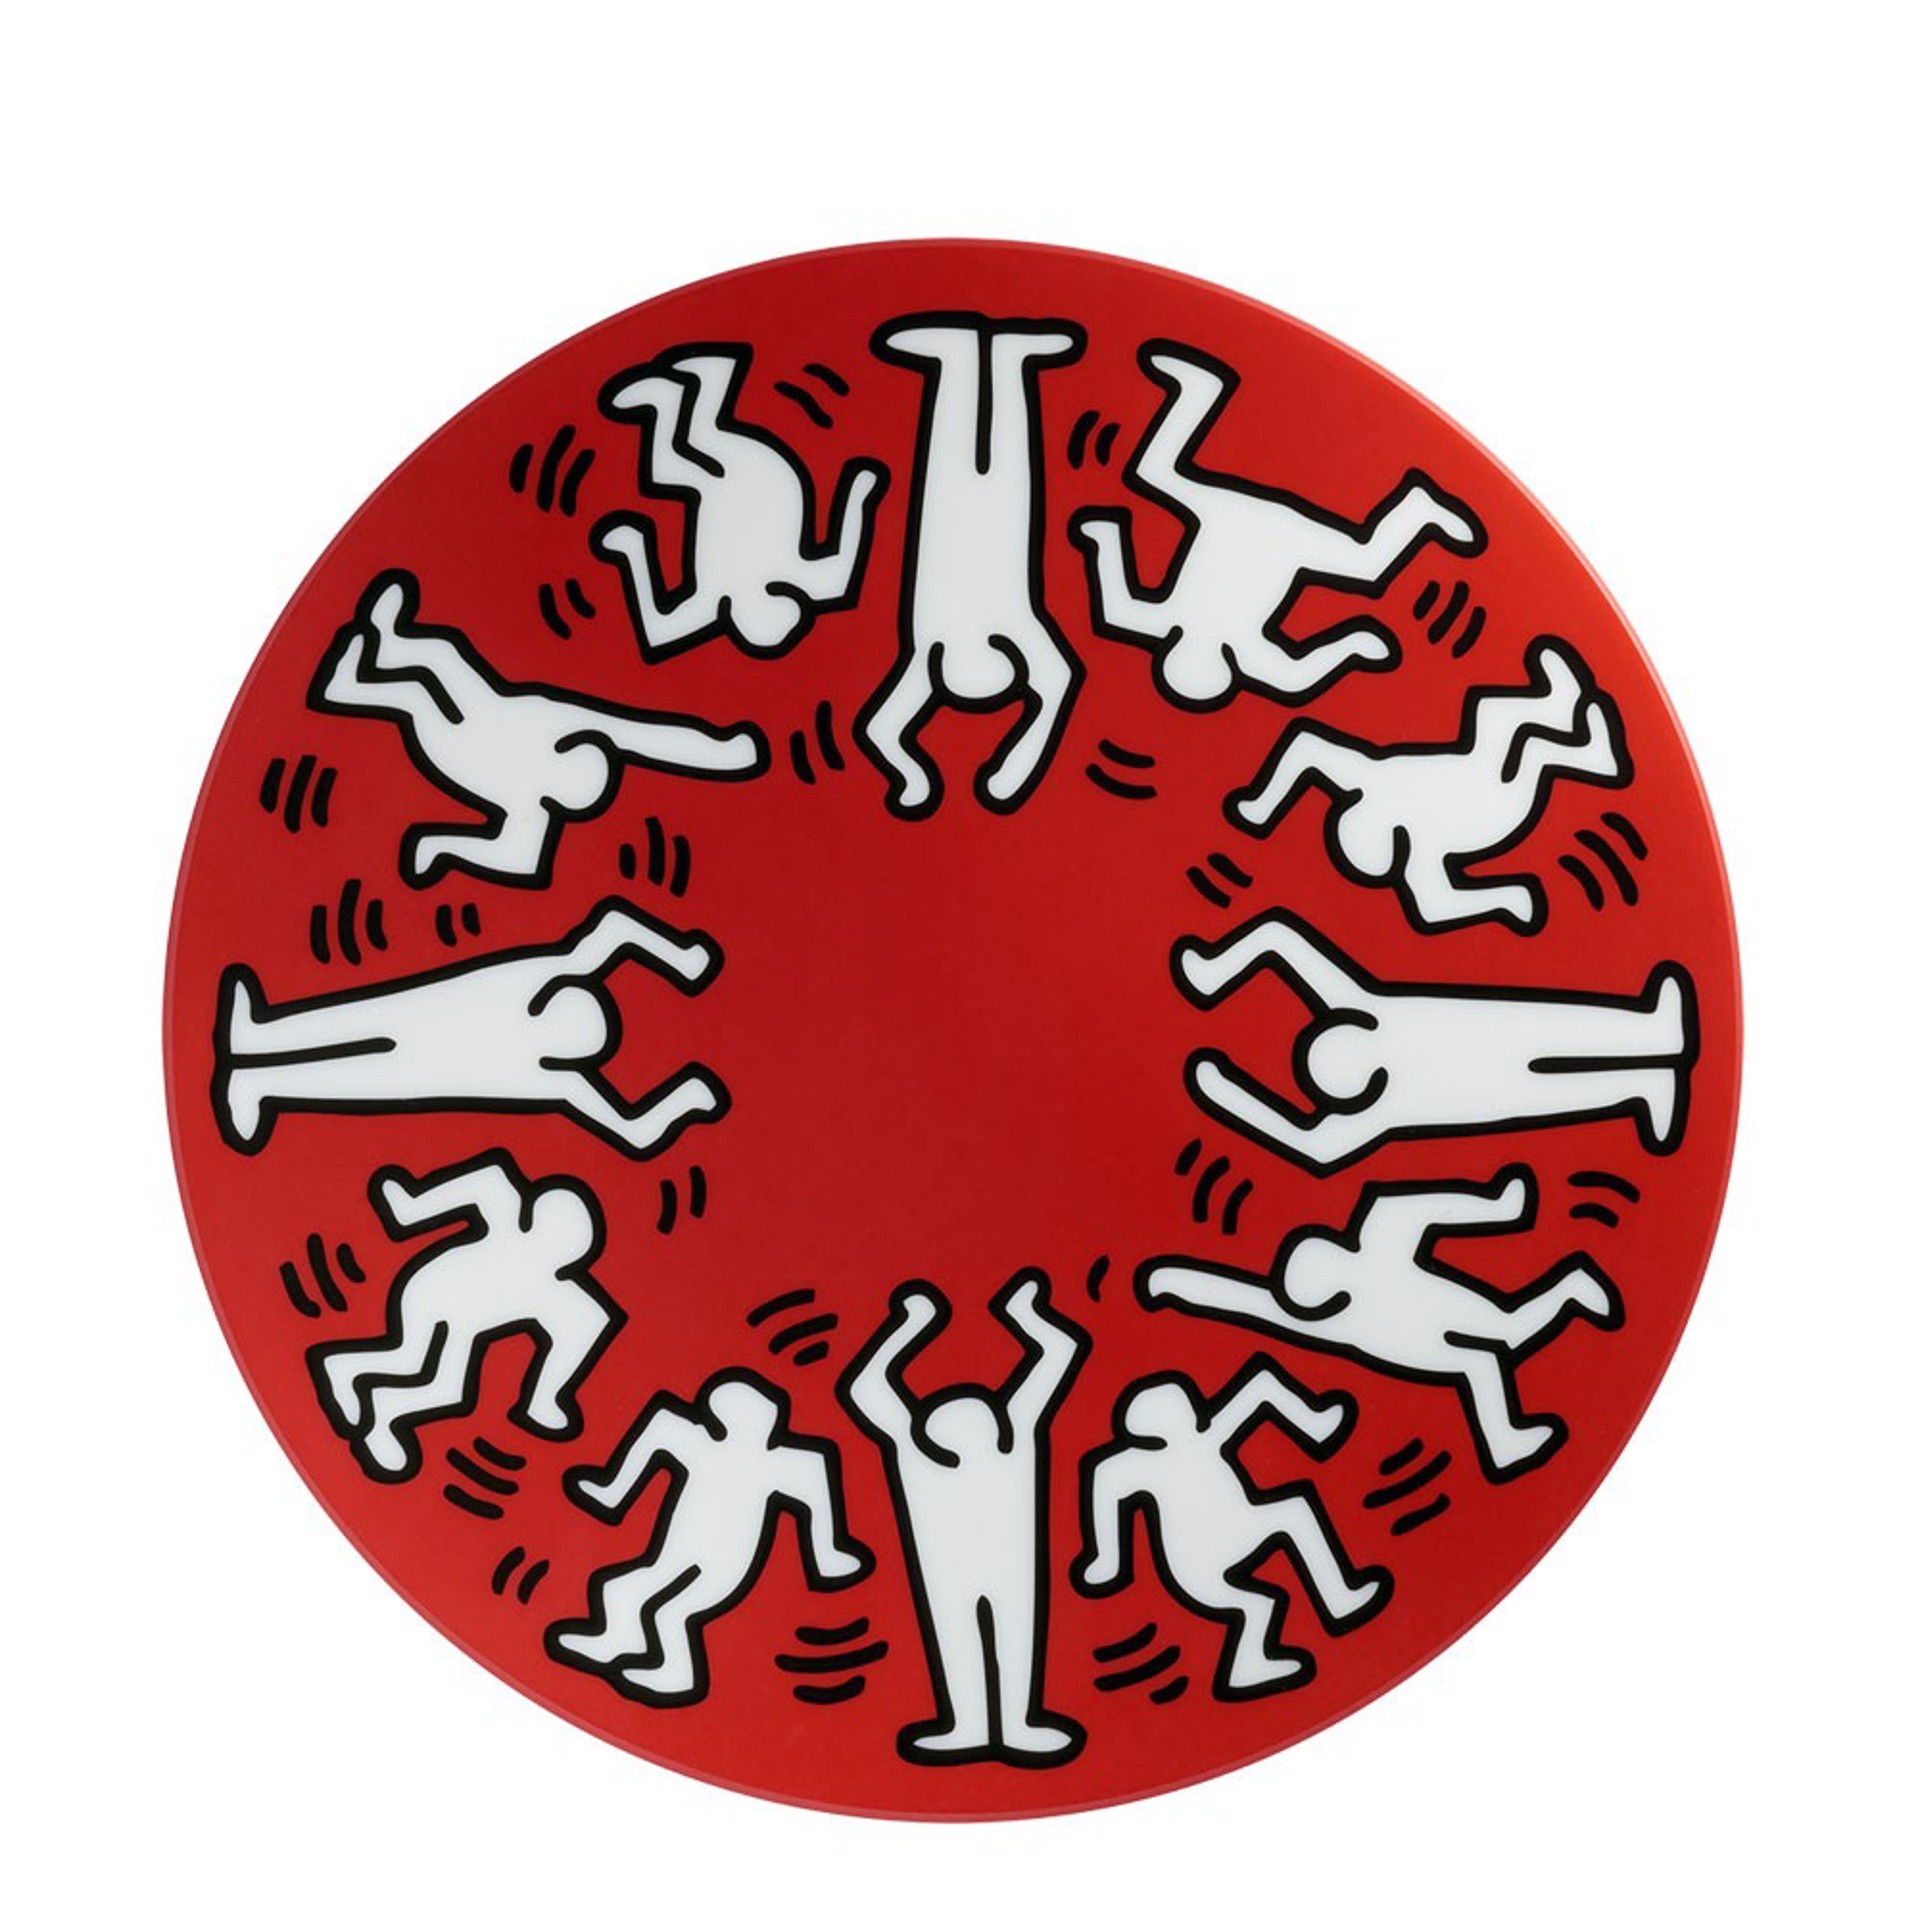 White on Red Plate by Keith Haring